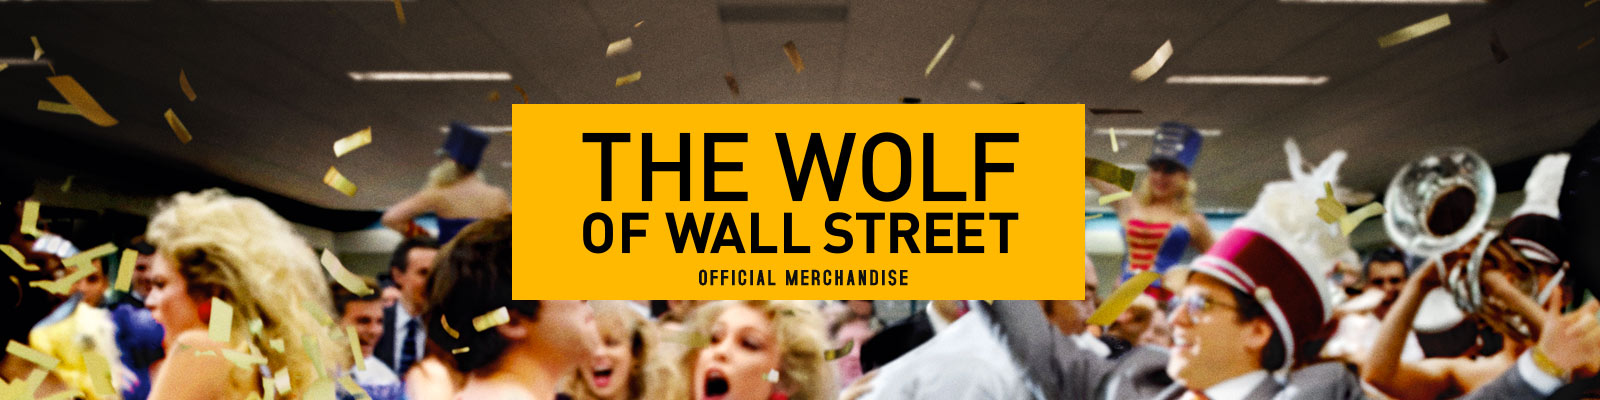 the wolf of wall street banner